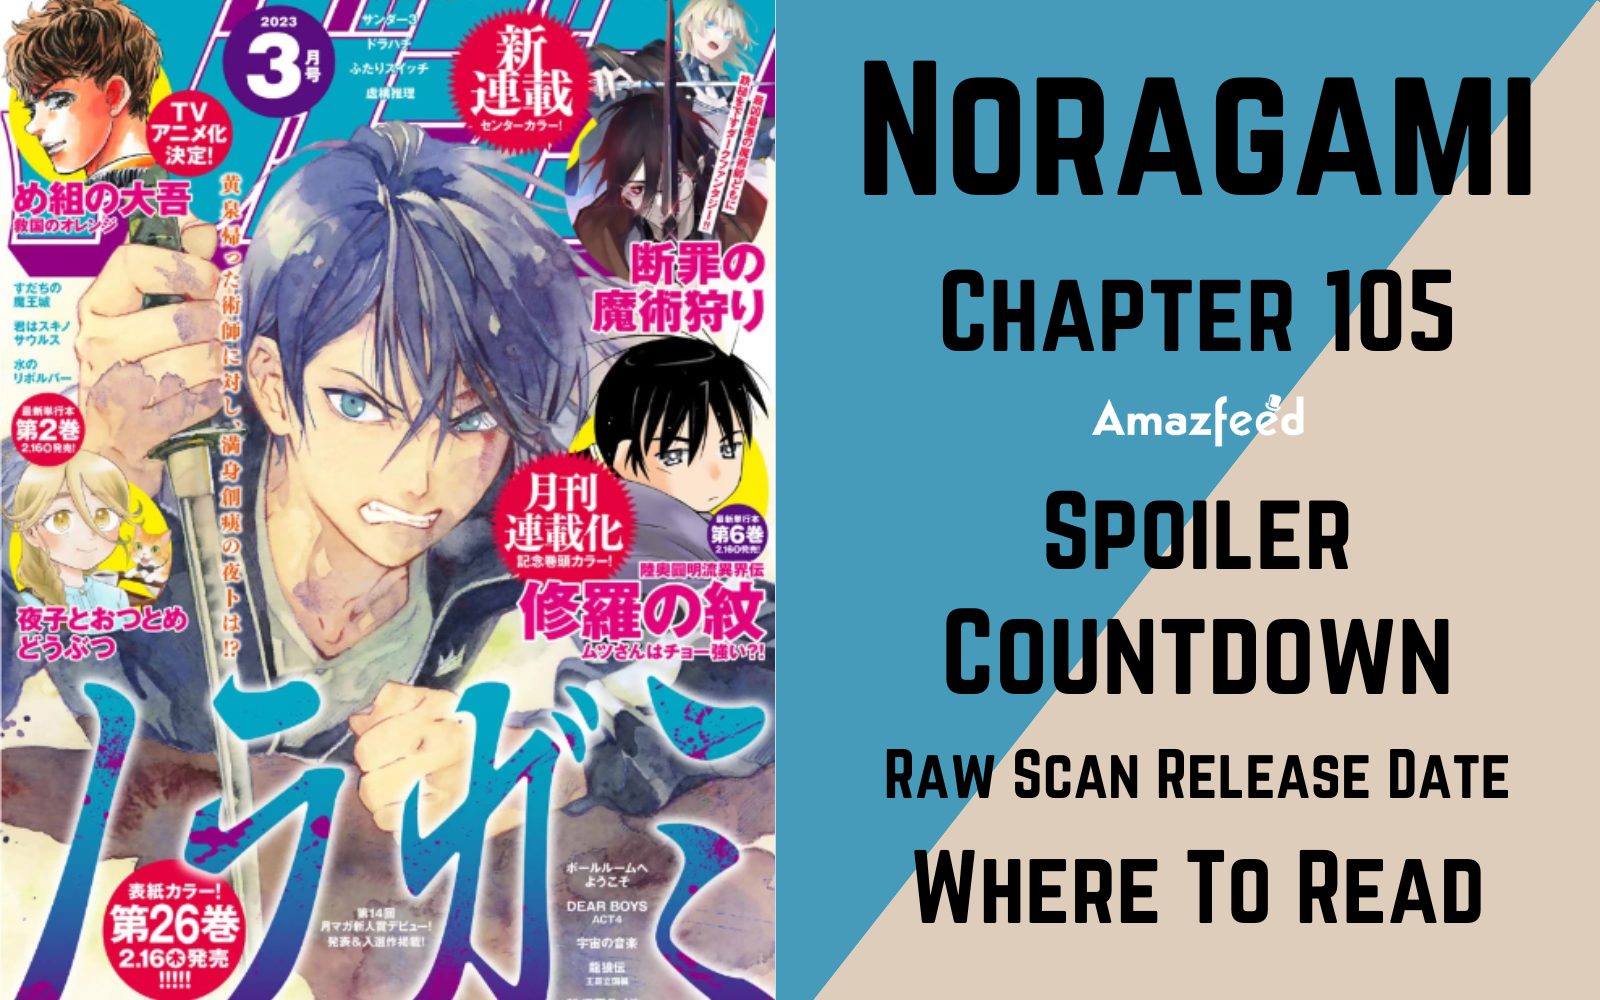 Noragami Chapter 105 Spoiler, Raw Scan, Countdown, Release Date » Amazfeed